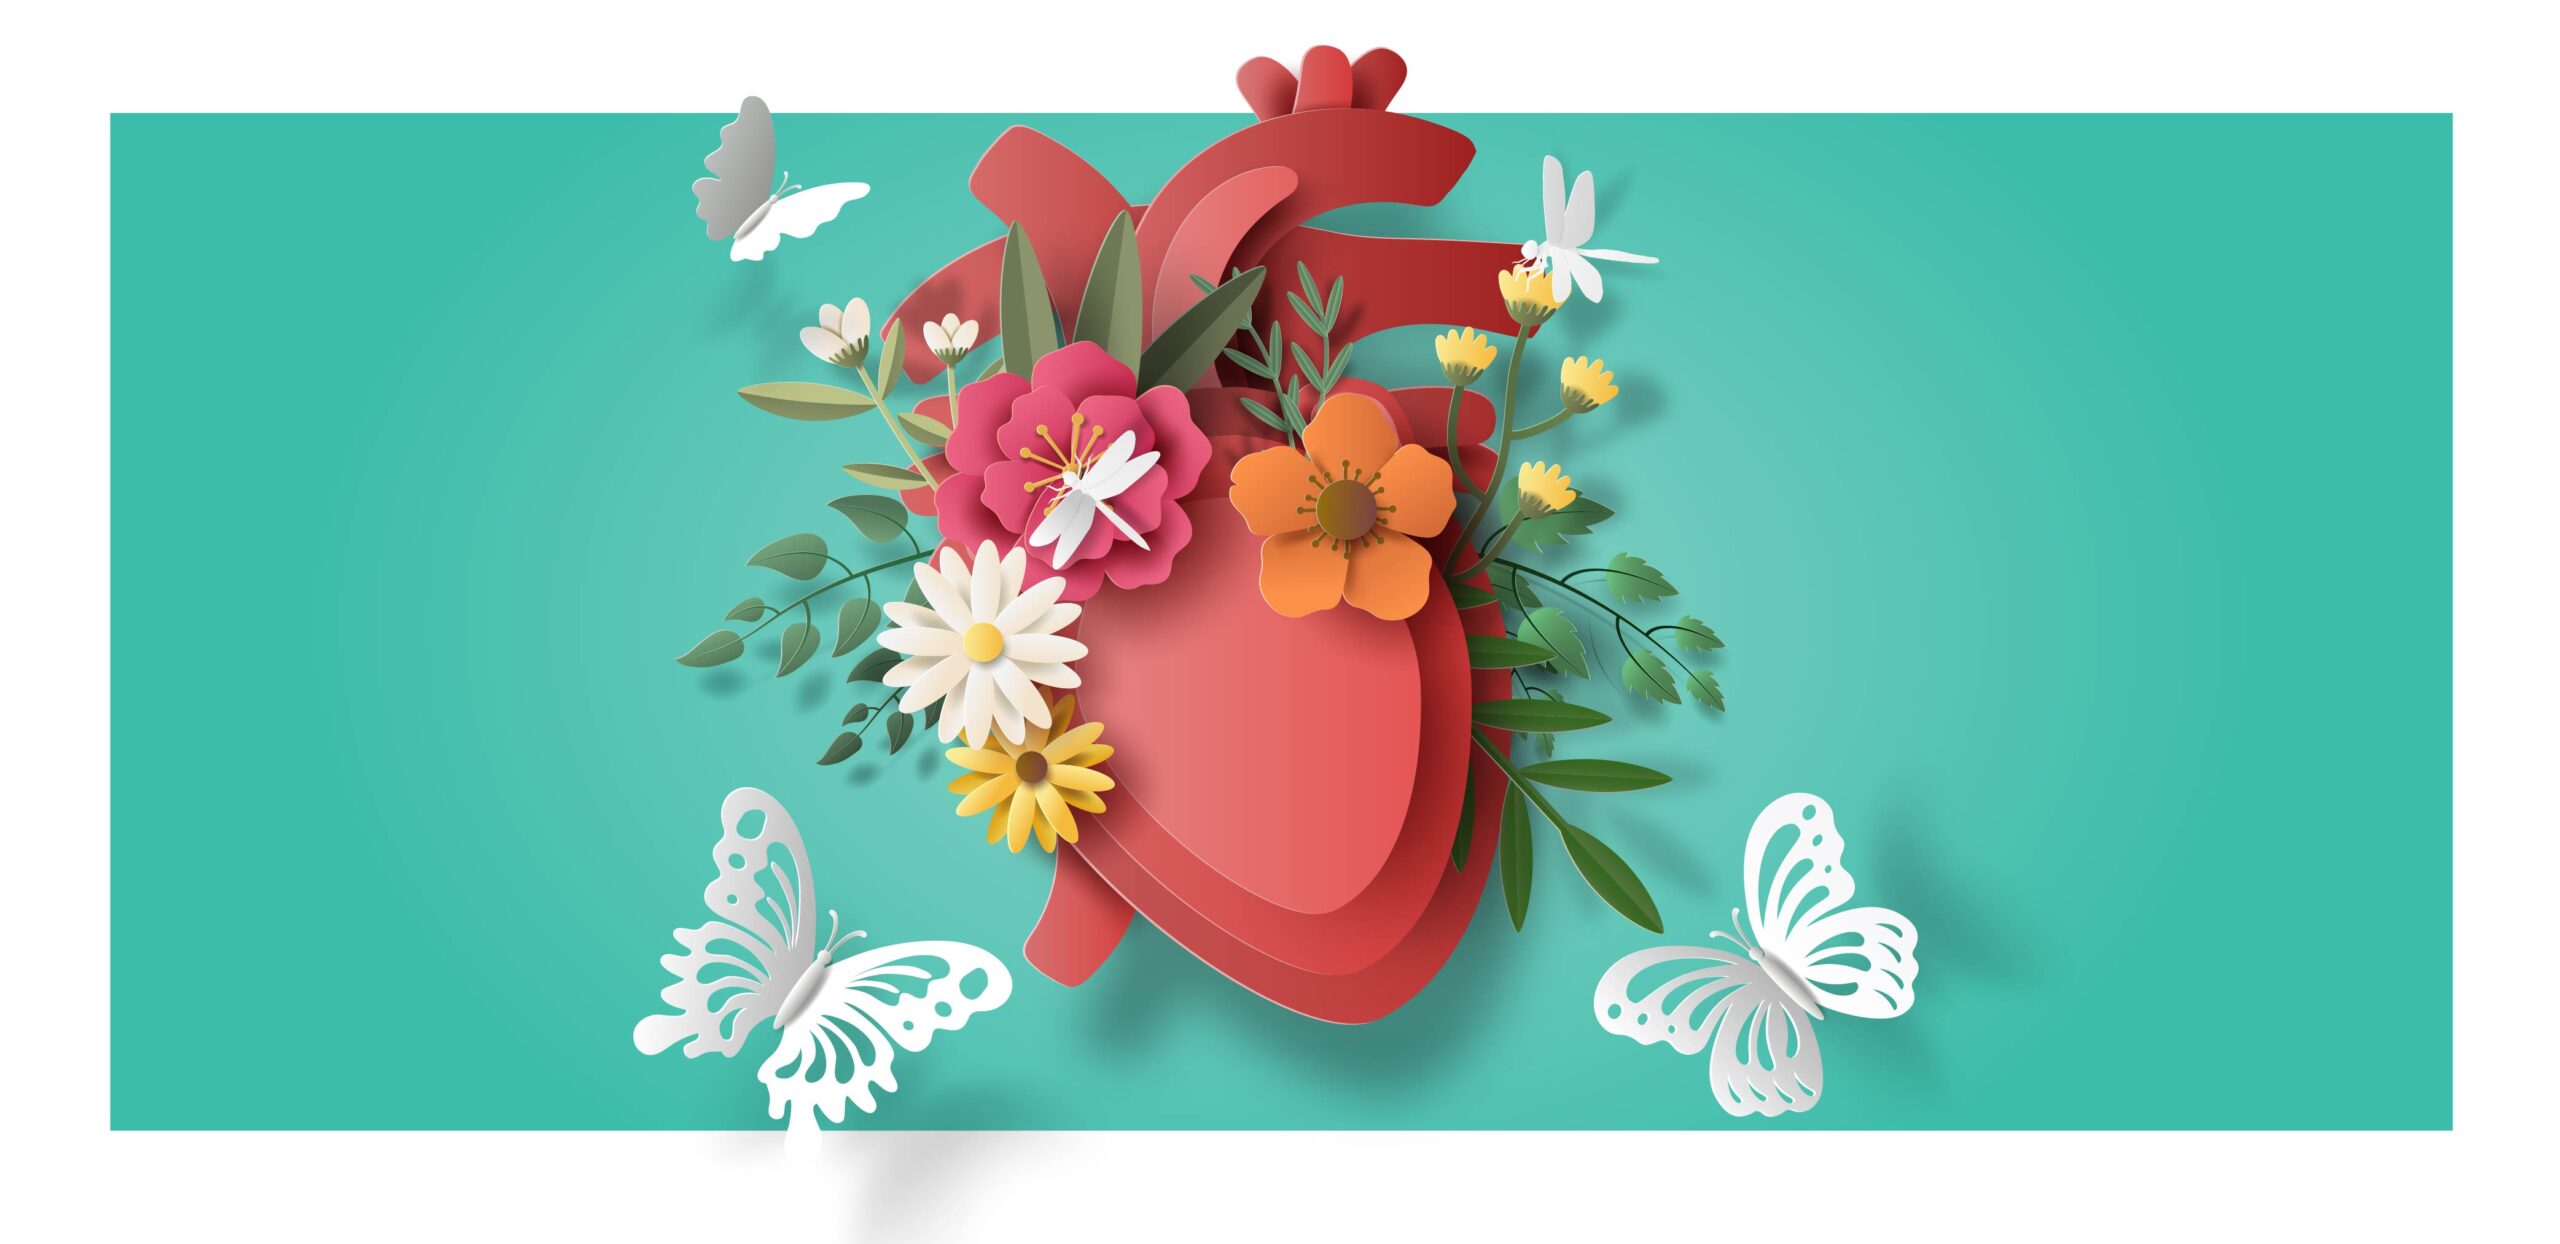 Conceptual illustration of a healthy heart